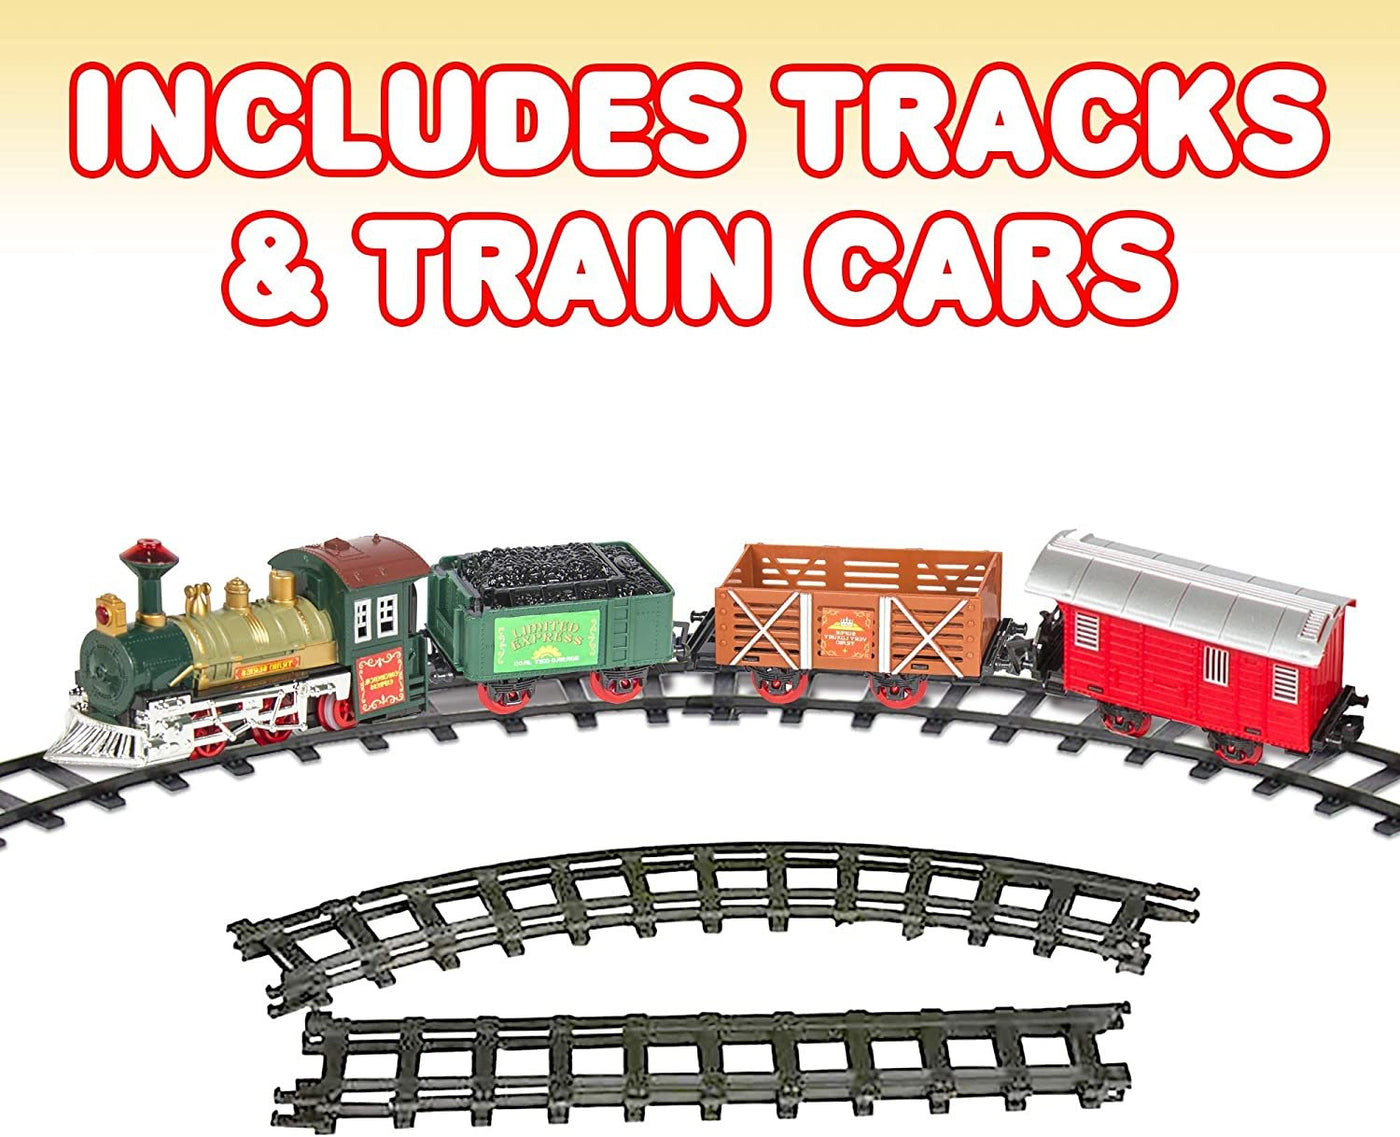 Deluxe Train Set for Kids, Battery-Operated Train with Cars & Tracks